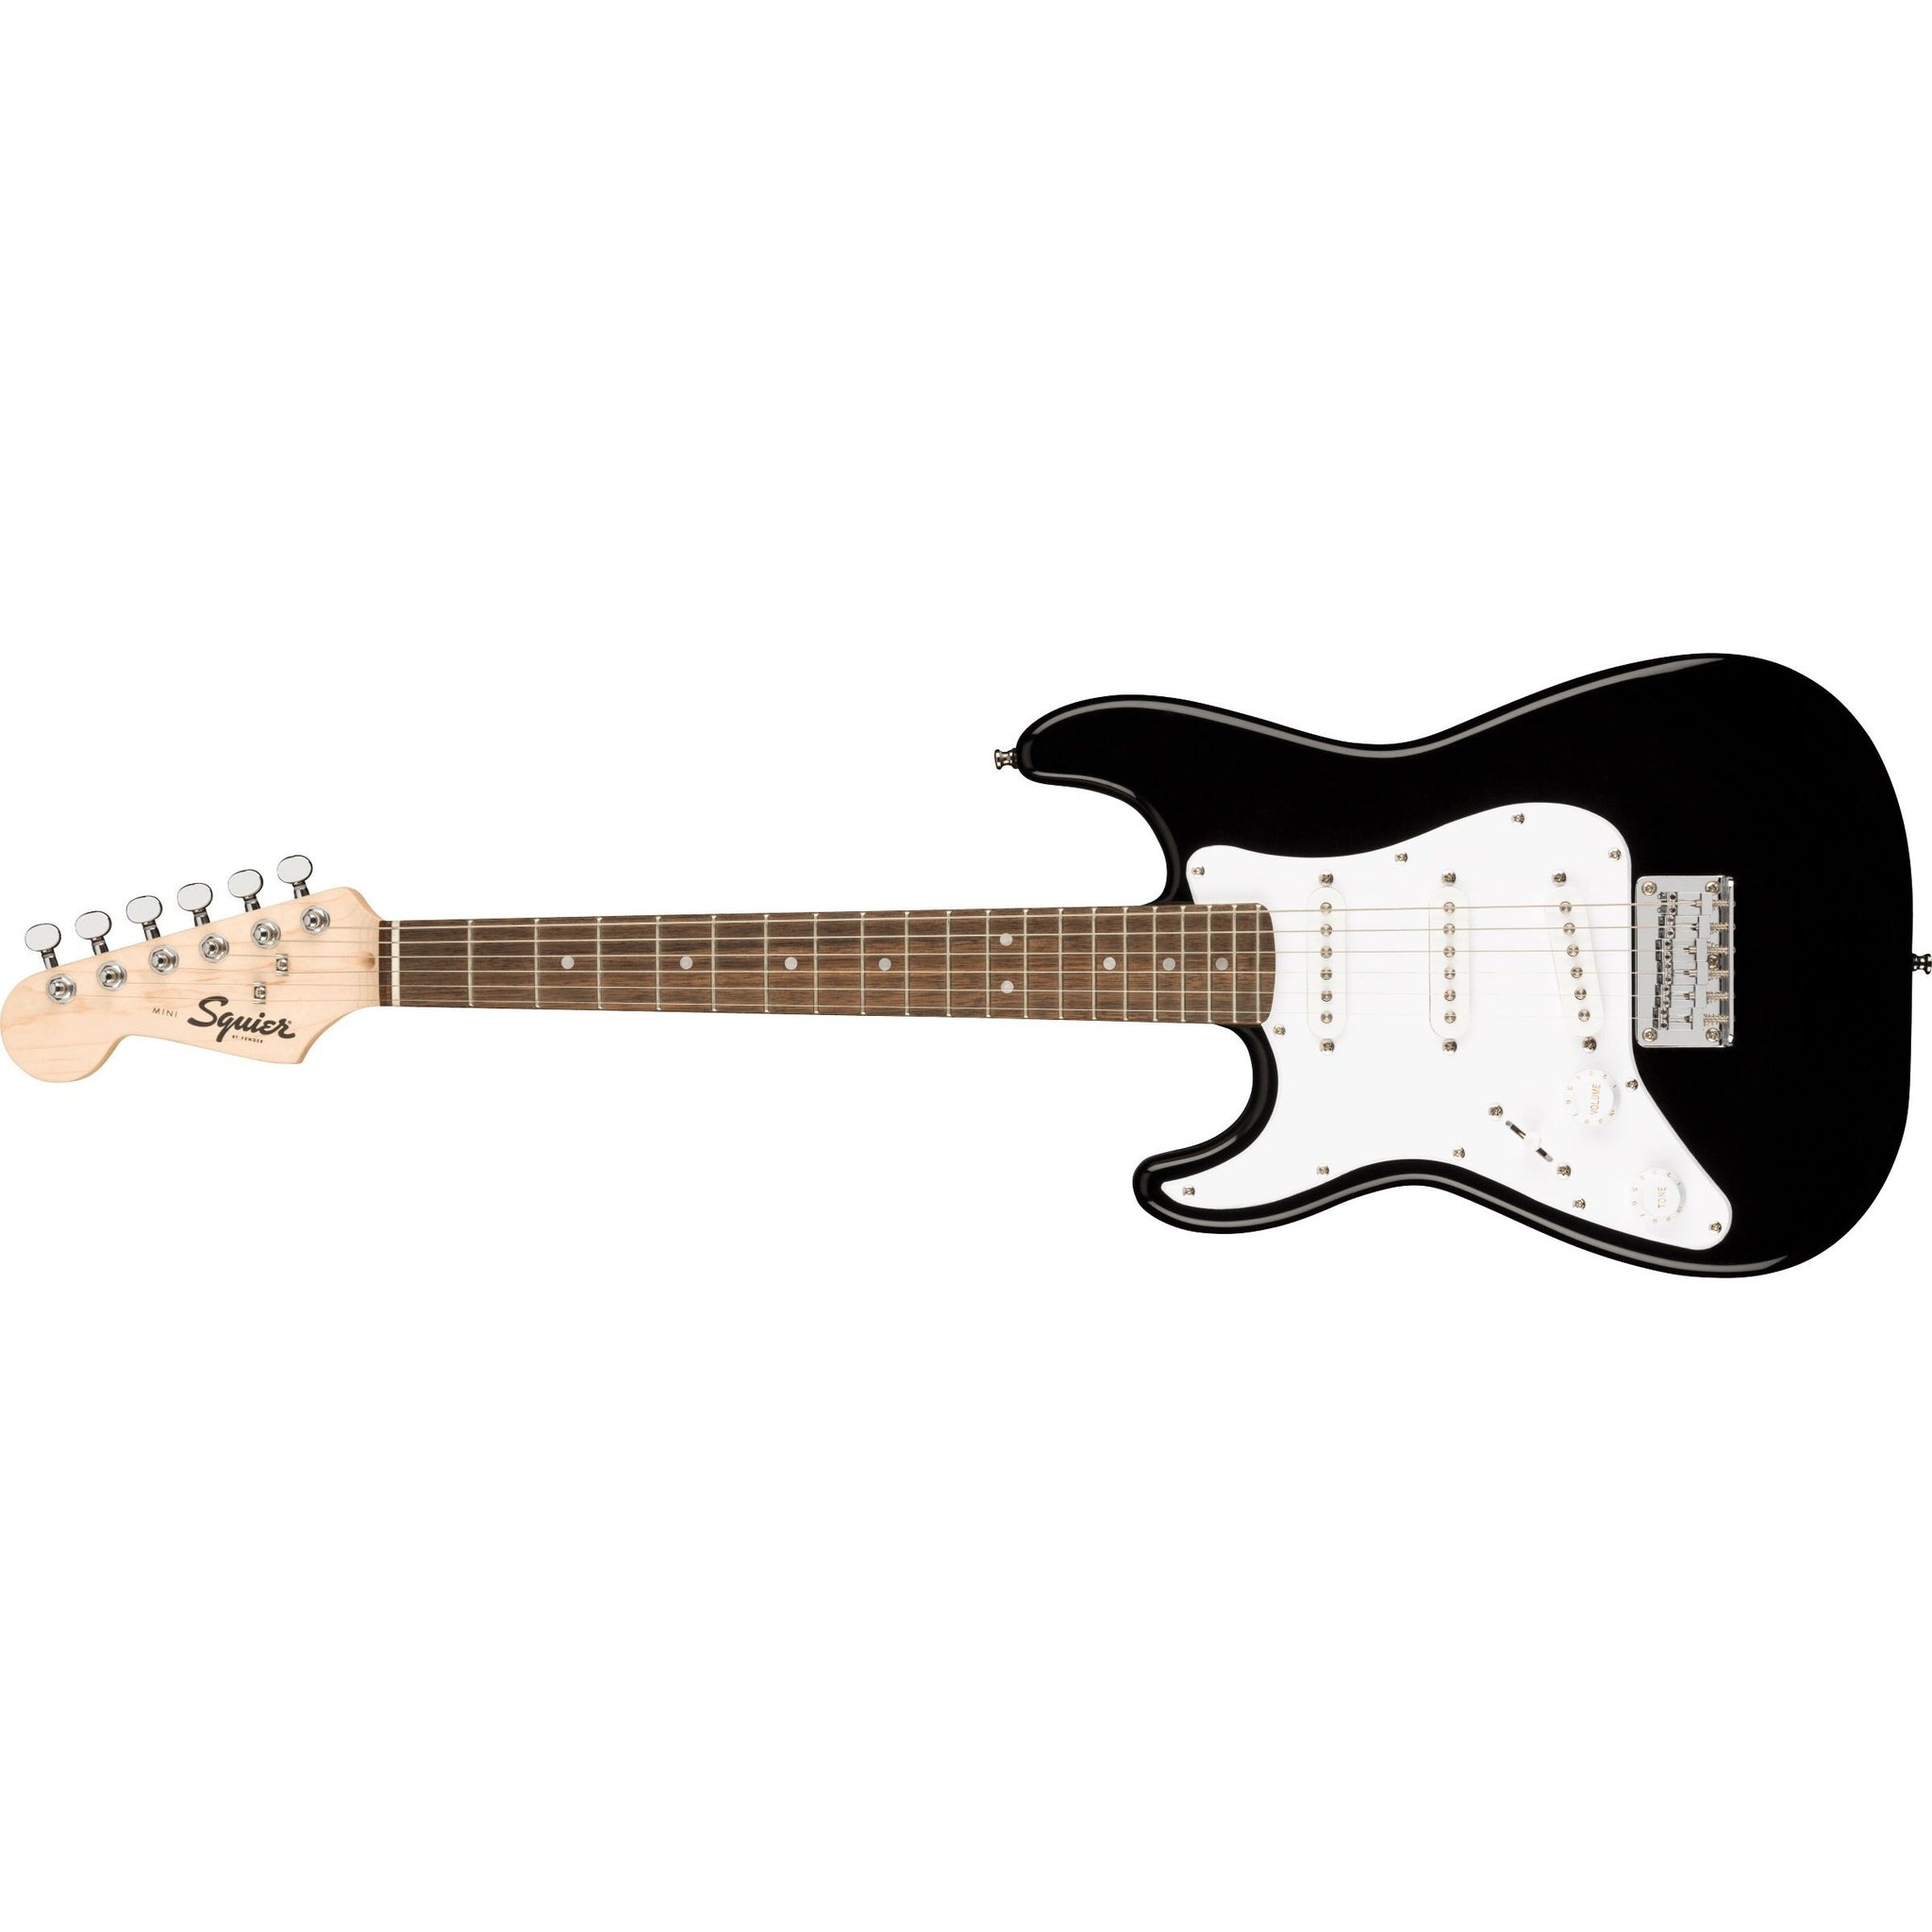 Fender Squier Mini Left-Handed Stratocaster Electric Guitar-Black-Music World Academy